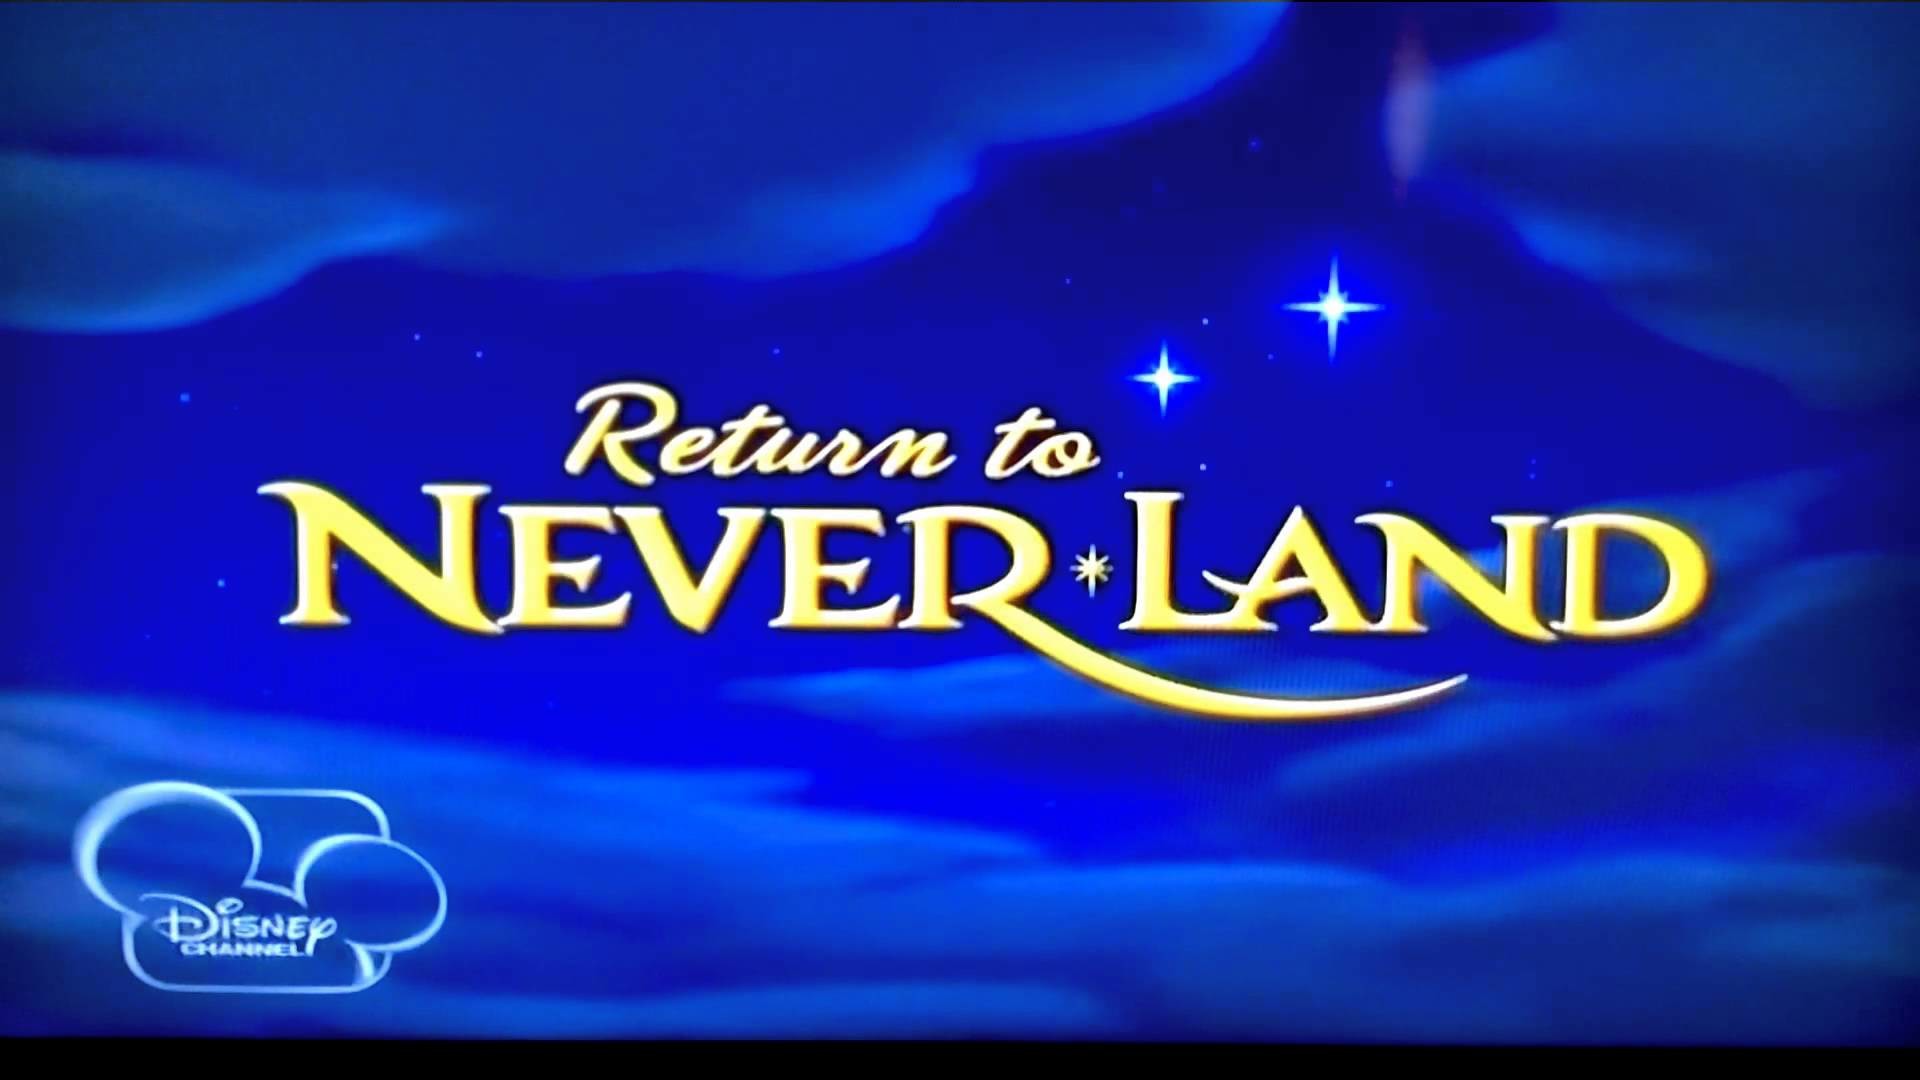 1920x1080 Peter Pan 2: Return to Never Land -- Second Star to the Right (Malay)